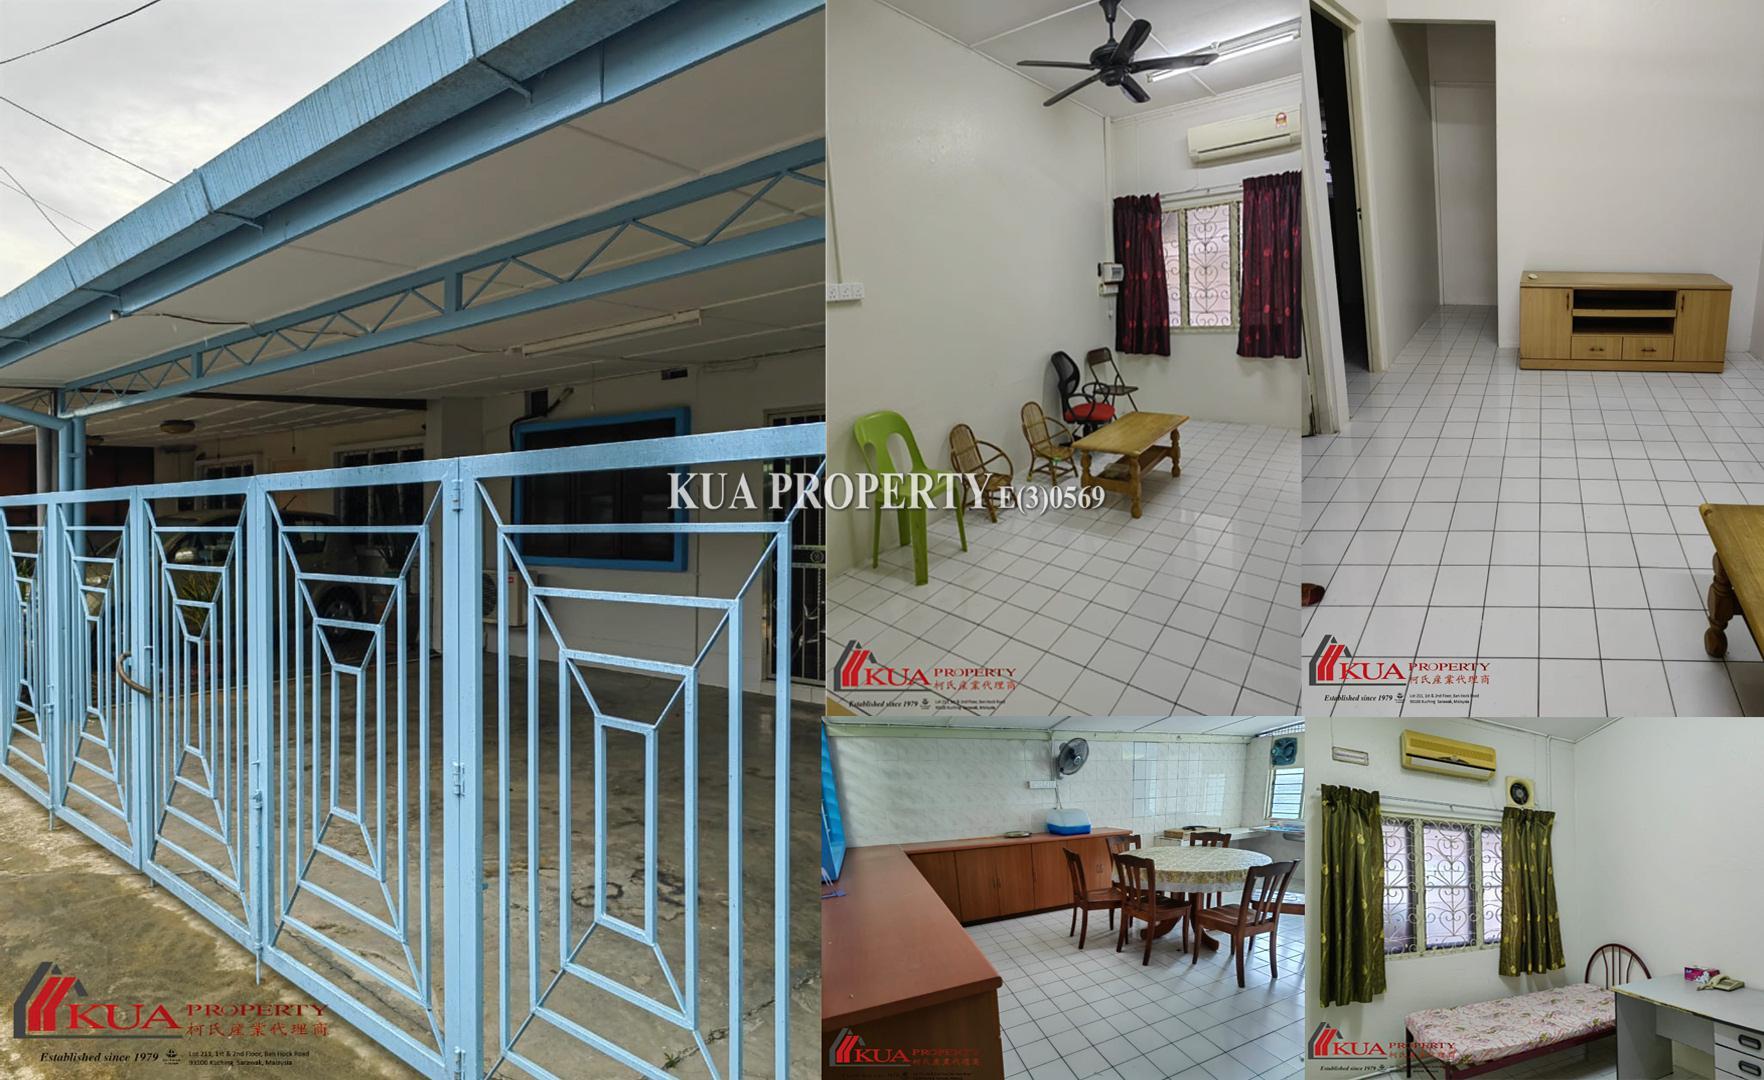 Single Storey Terrace House For Rent! 📍Located at Foochow Road, Kuching